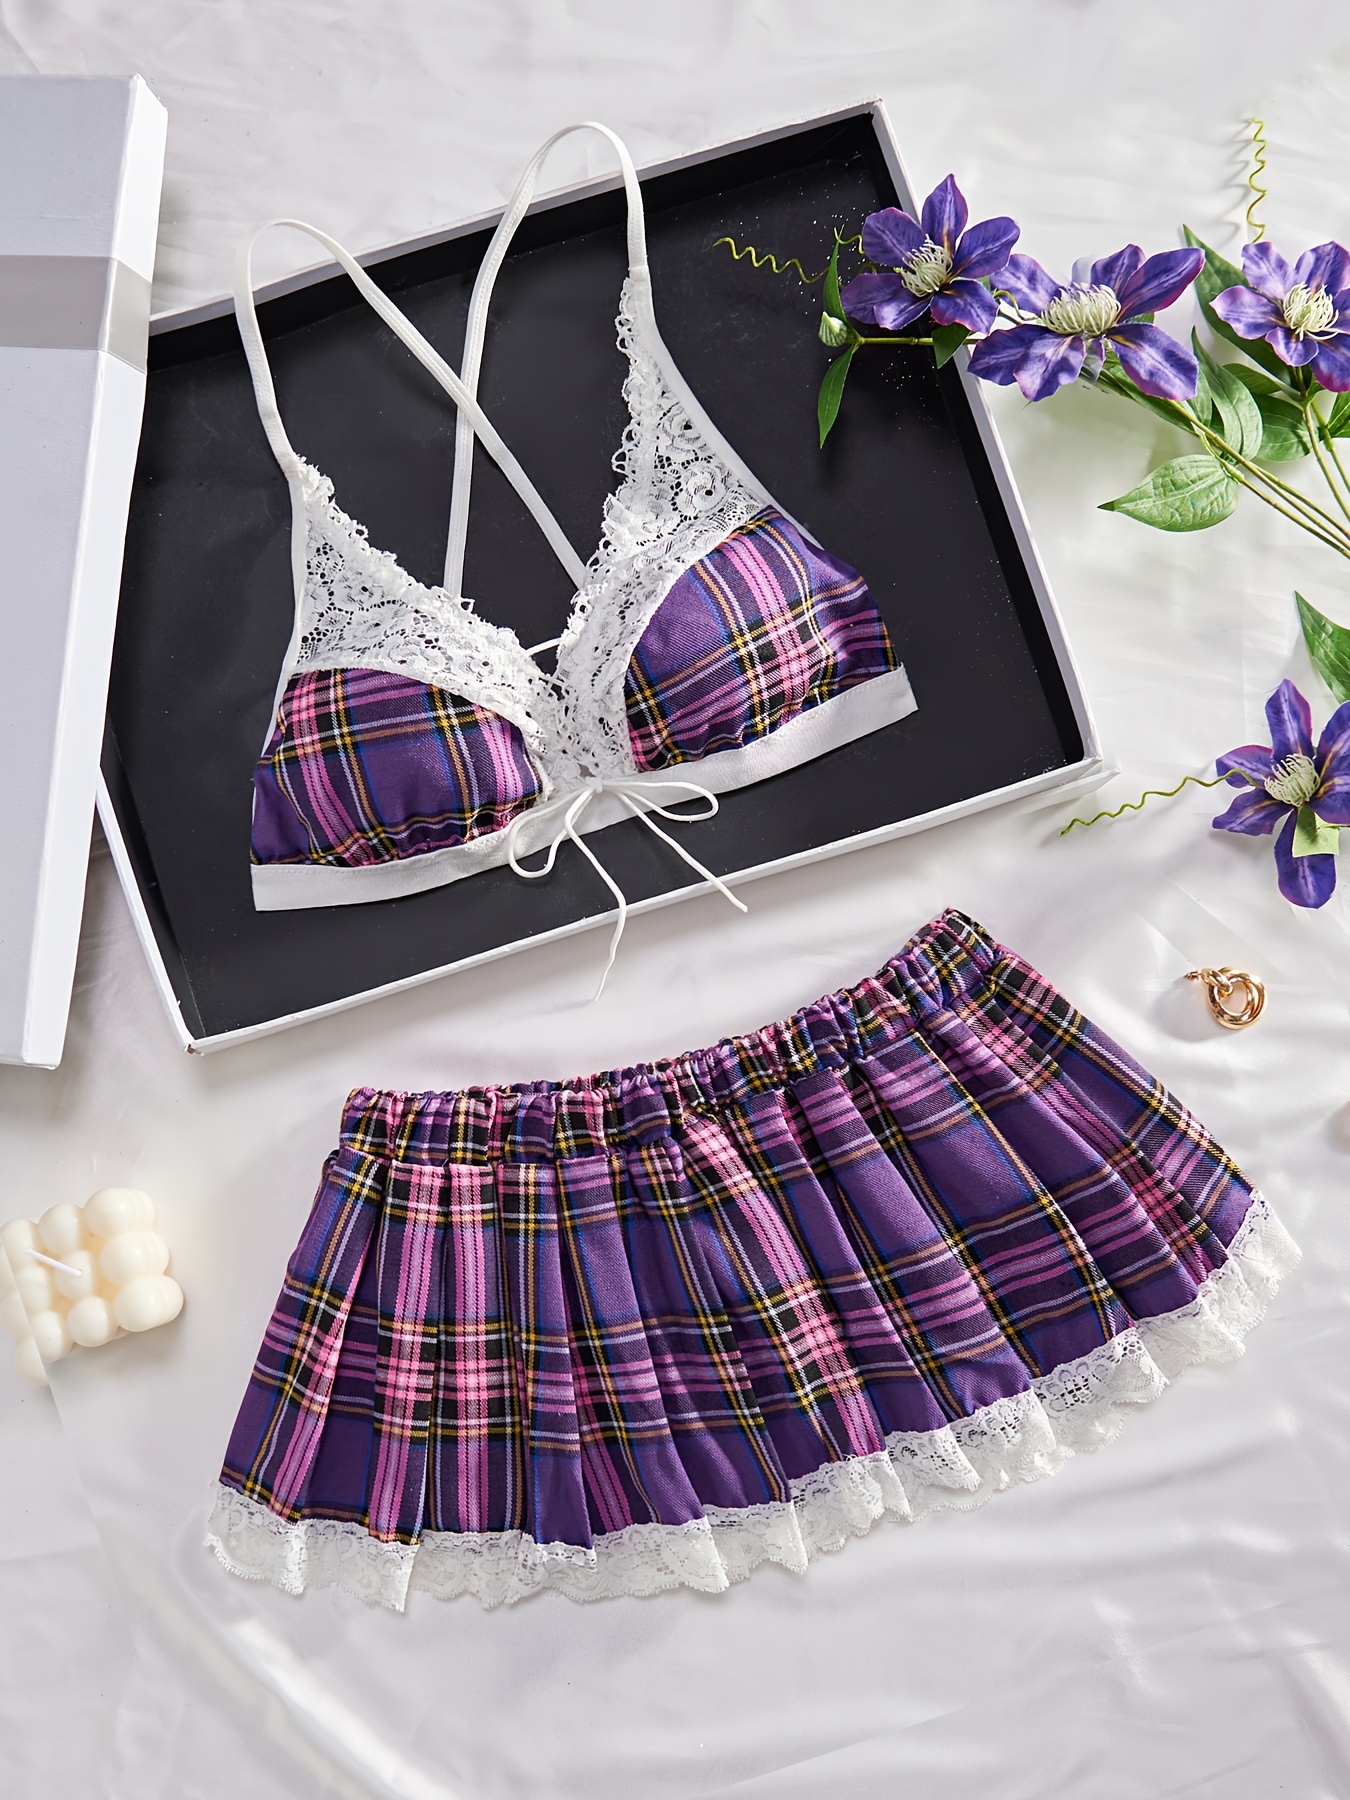 Female Underclothes Women Fashion Print Mesh Lingerie Fashion Loose Three  Pieces Set Underwear With Socks Or Ring Outfits for Woman Clubwear 